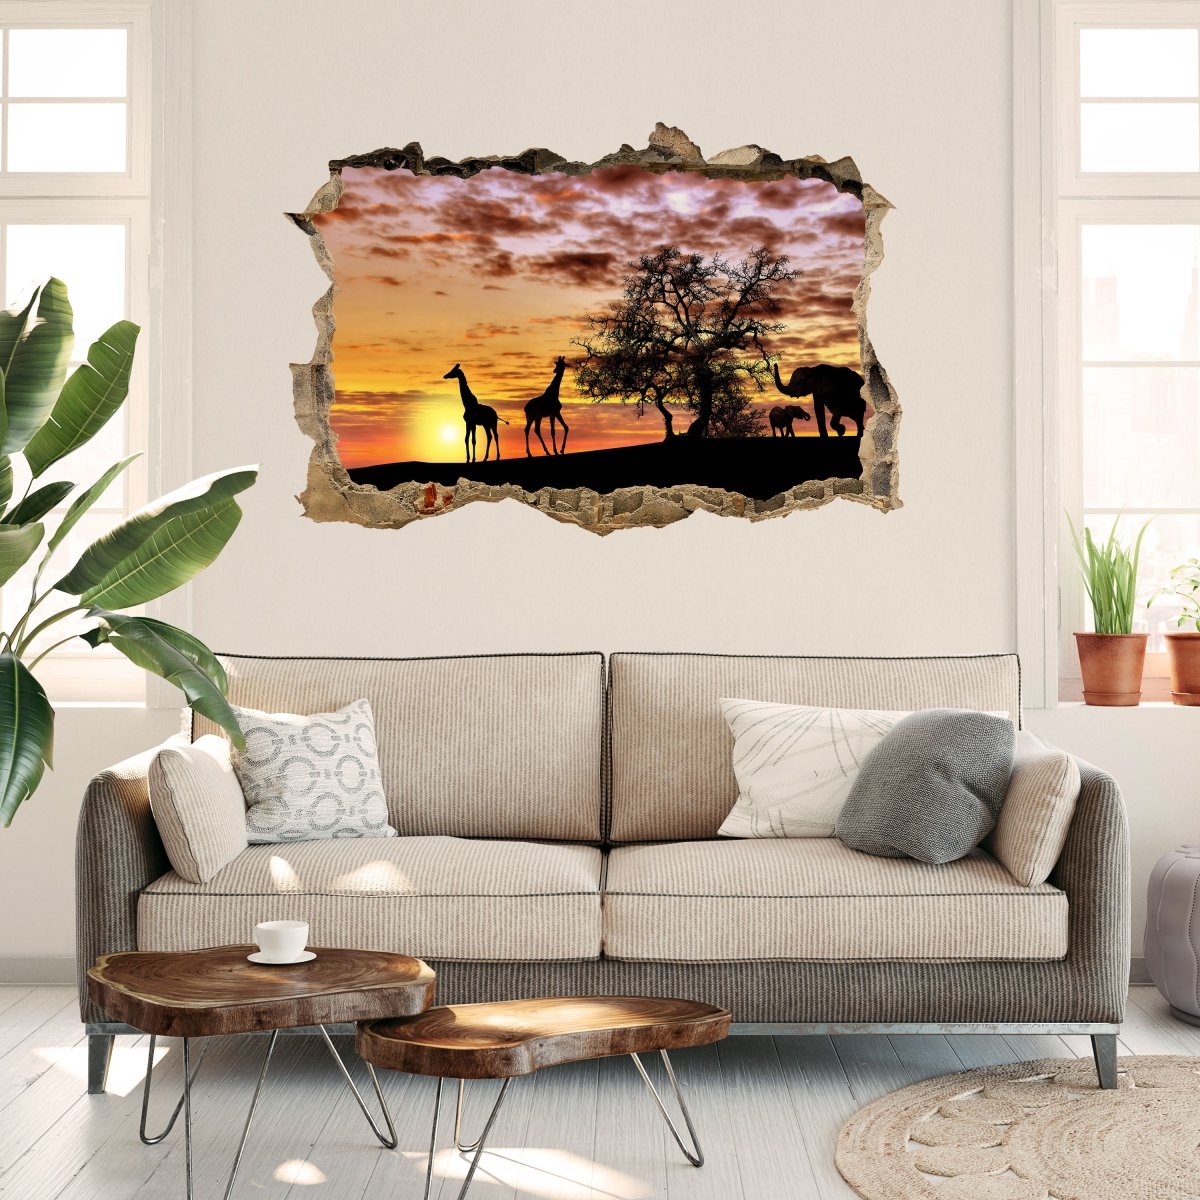 3D wall sticker animals in the sunset - Wall Decal M0518